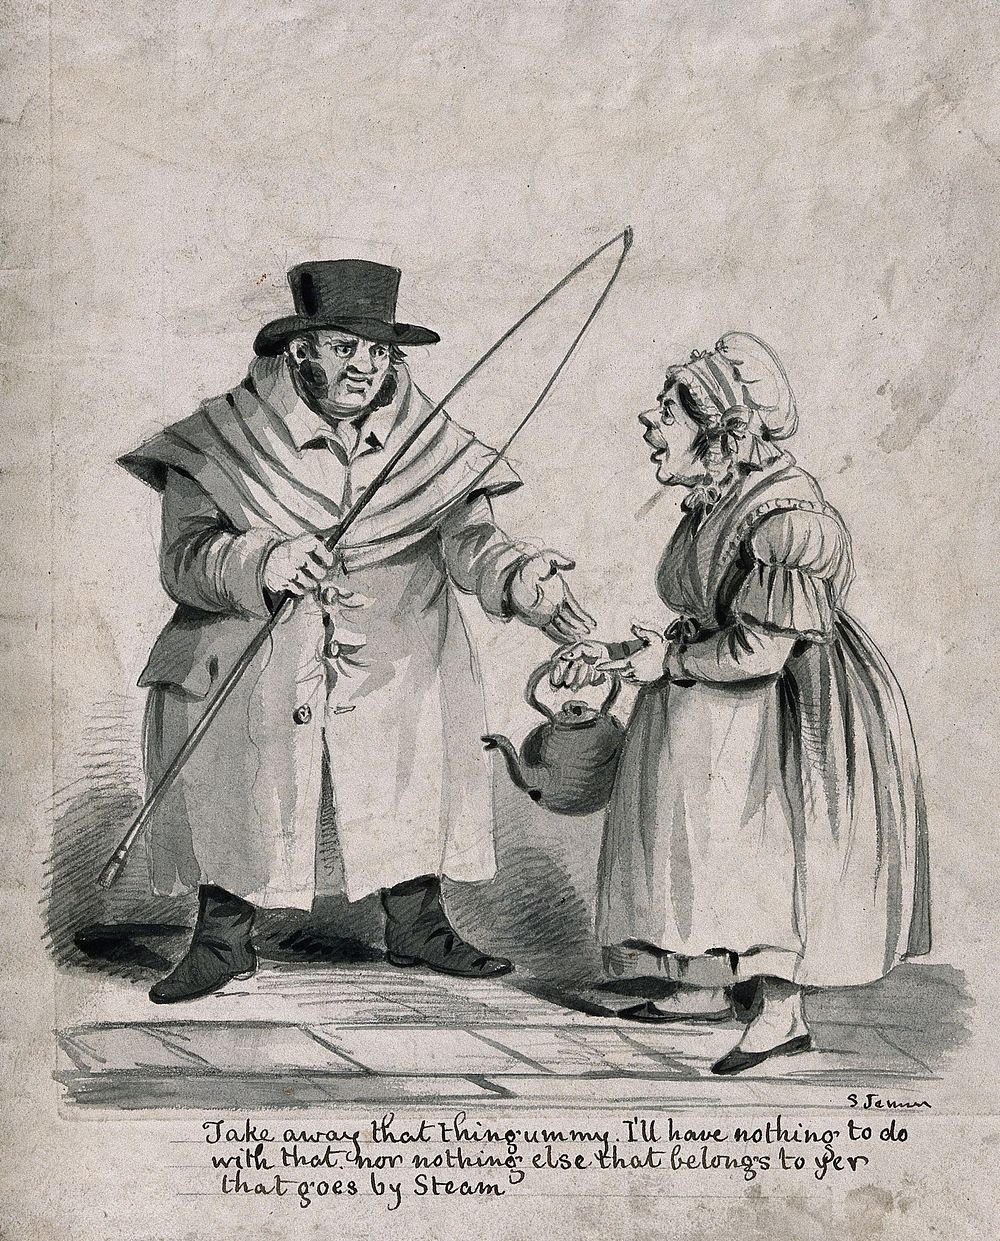 A coachman with a whip and a woman with a kettle: the man mistrusts anything using steam (implying steam trains). Pencil and…